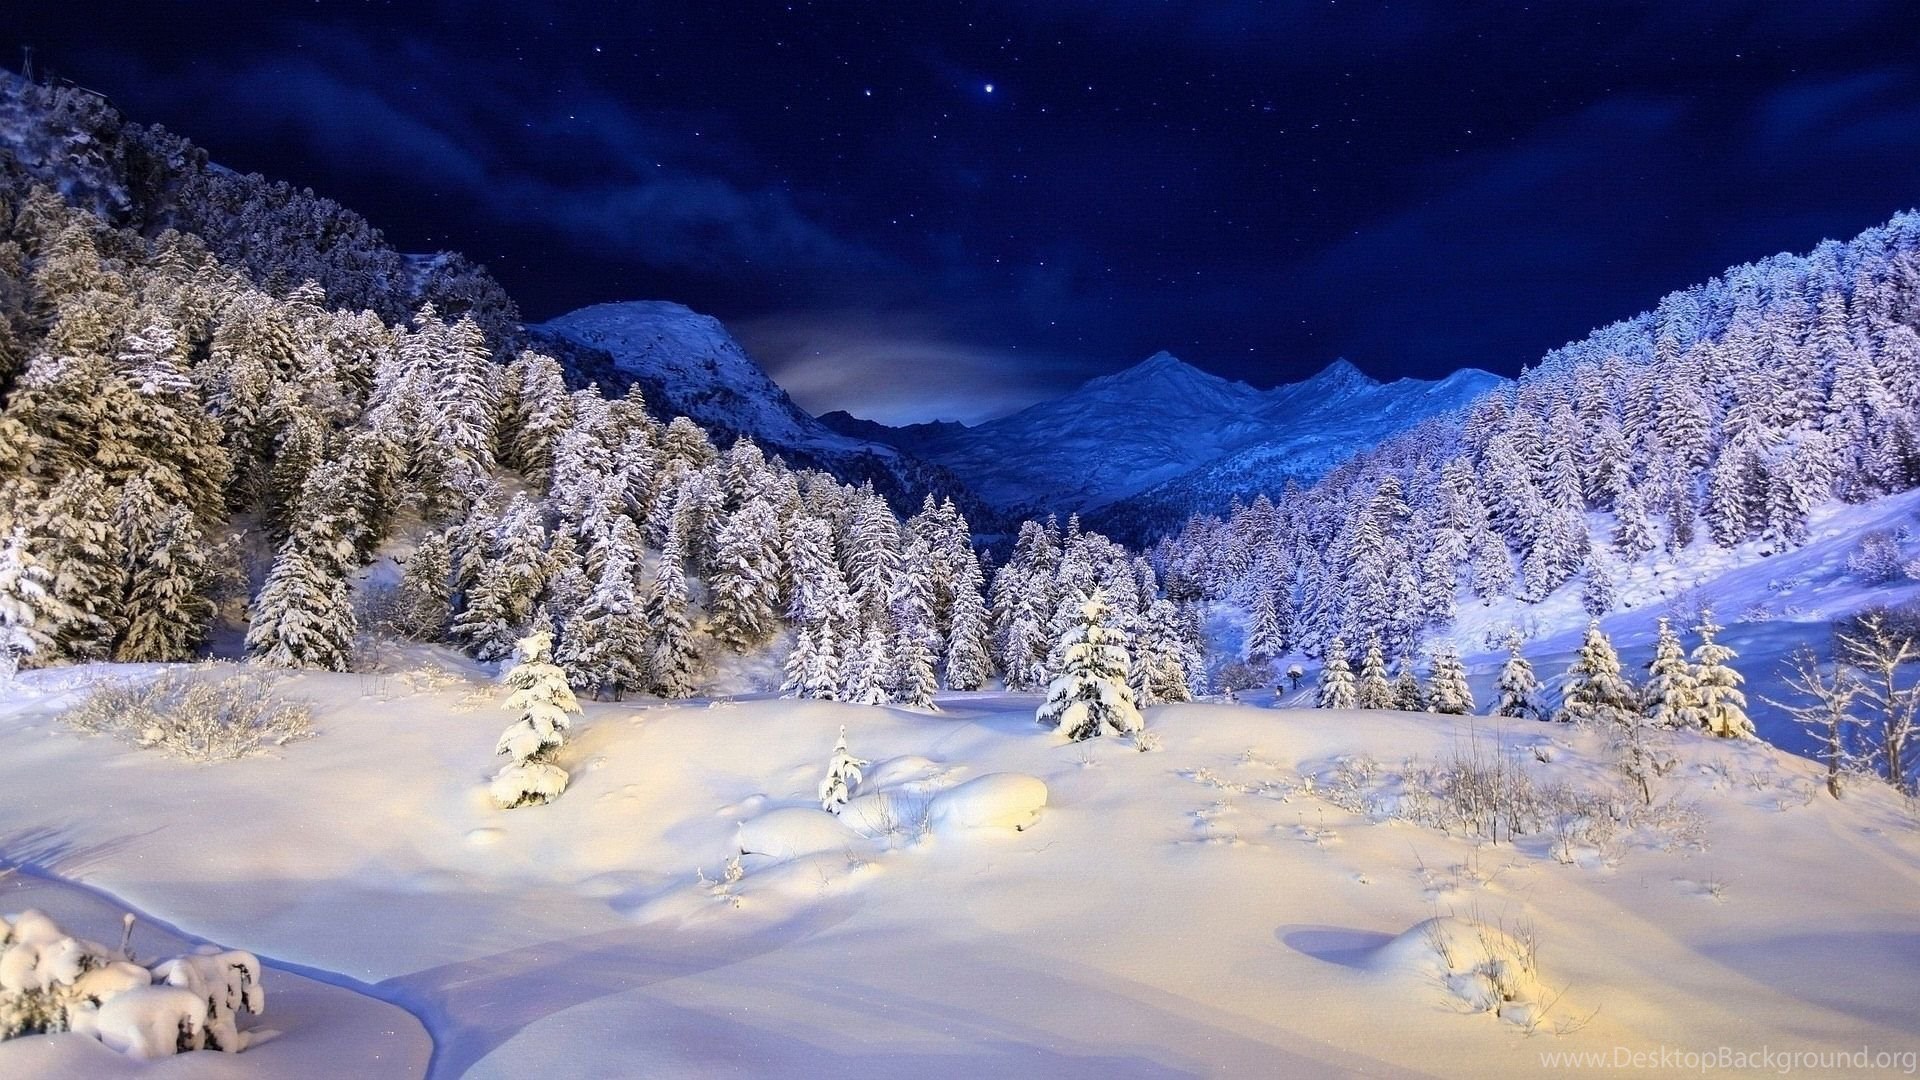 Snow Covered Mountain Winter Night Wallpapers Hd Background - Mountain Winter Night Landscape - HD Wallpaper 